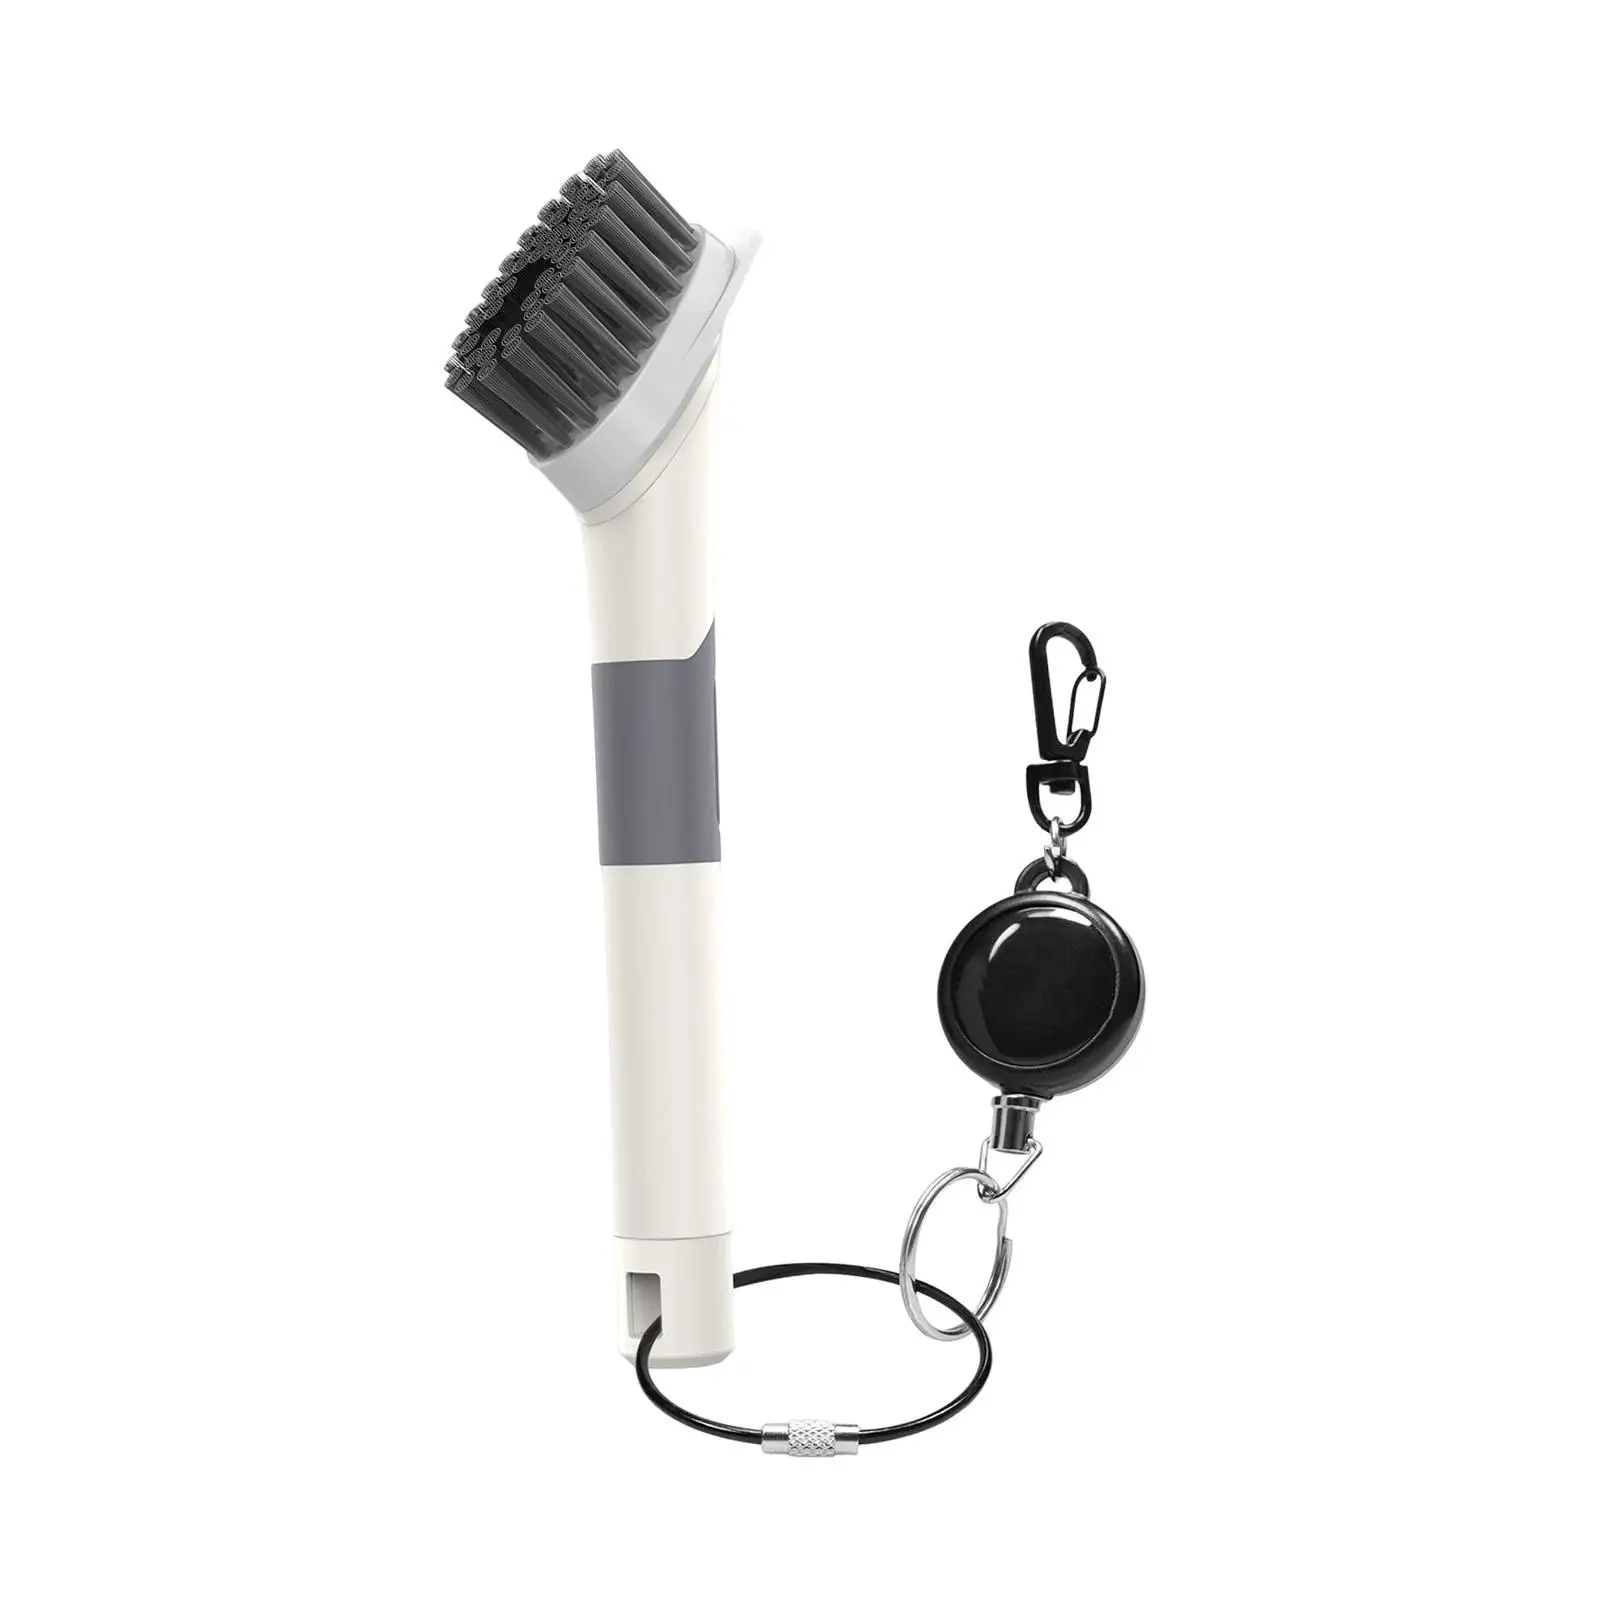 Golf Club Cleaner Cleaning Brushes Golf Tool Portable for Men Golf Gifts